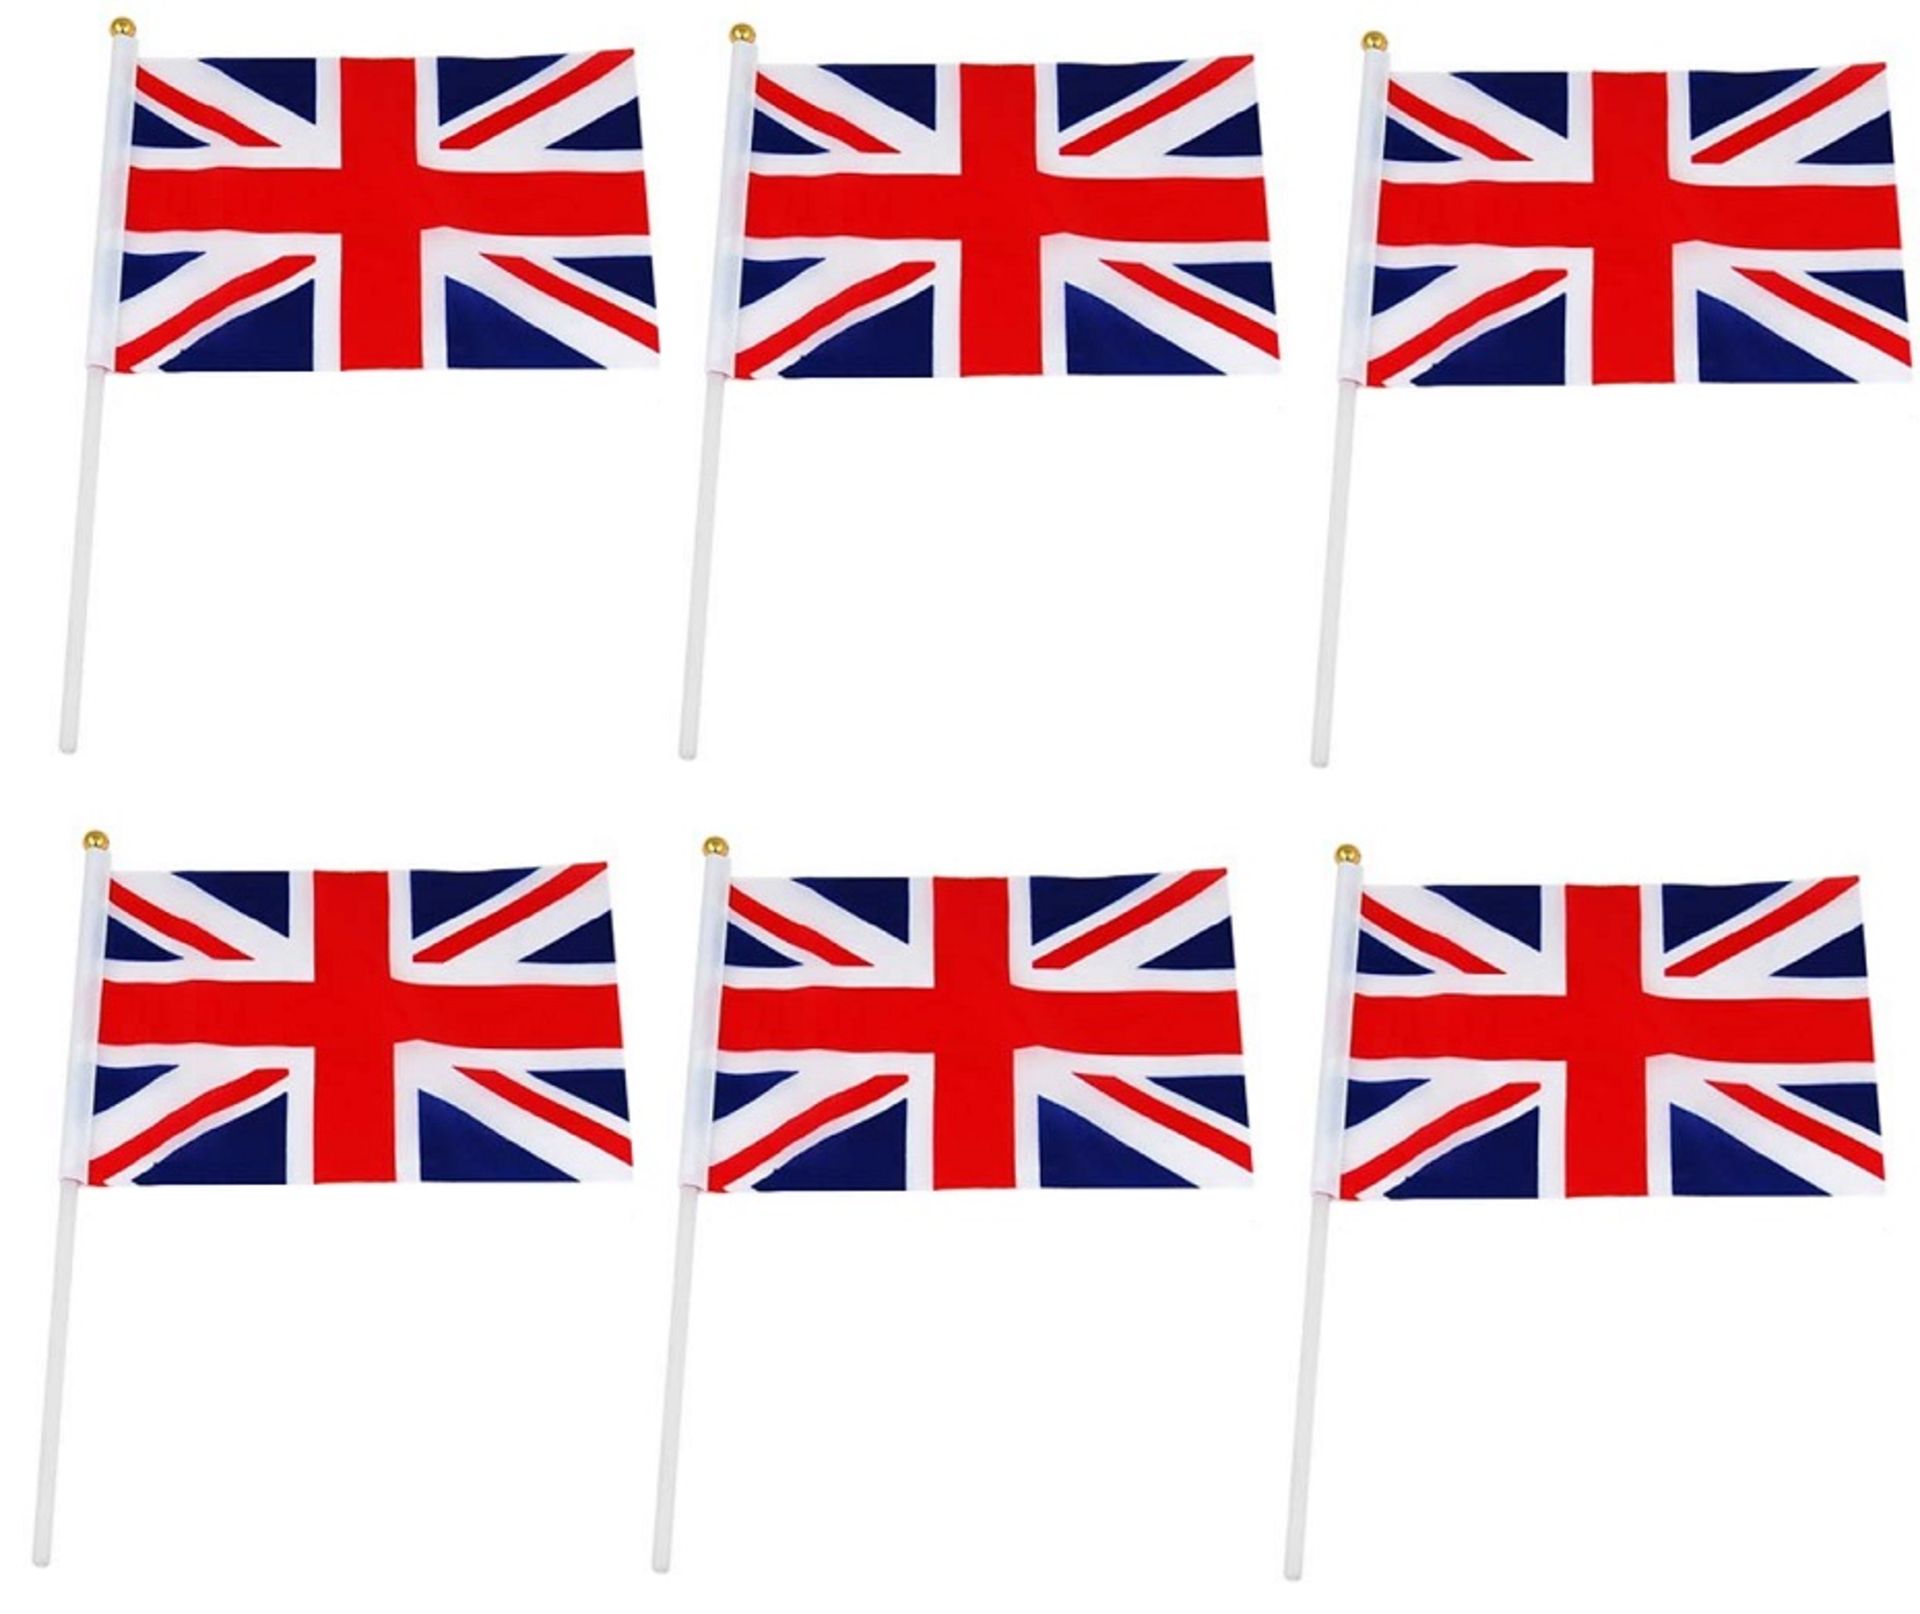 V Brand New 6 Packs Of 6 (Total 36) Fabric Union Jack Waving Flags 15 x 22 cm - Ideal For Royal